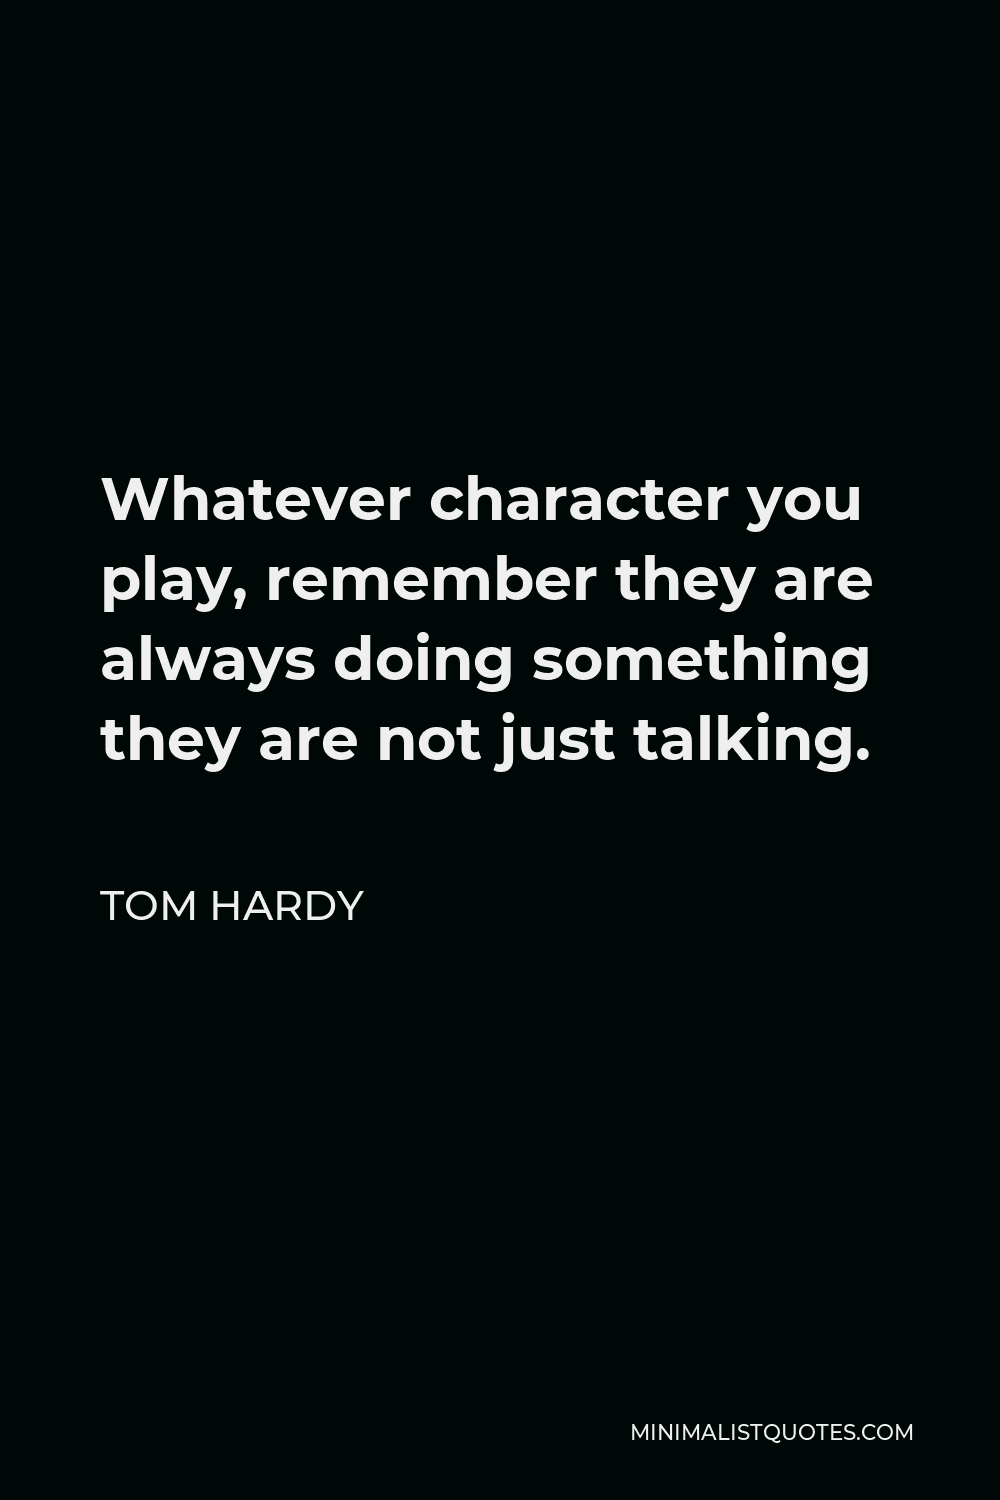 Tom Hardy Quote - Whatever character you play, remember they are always doing something they are not just talking.